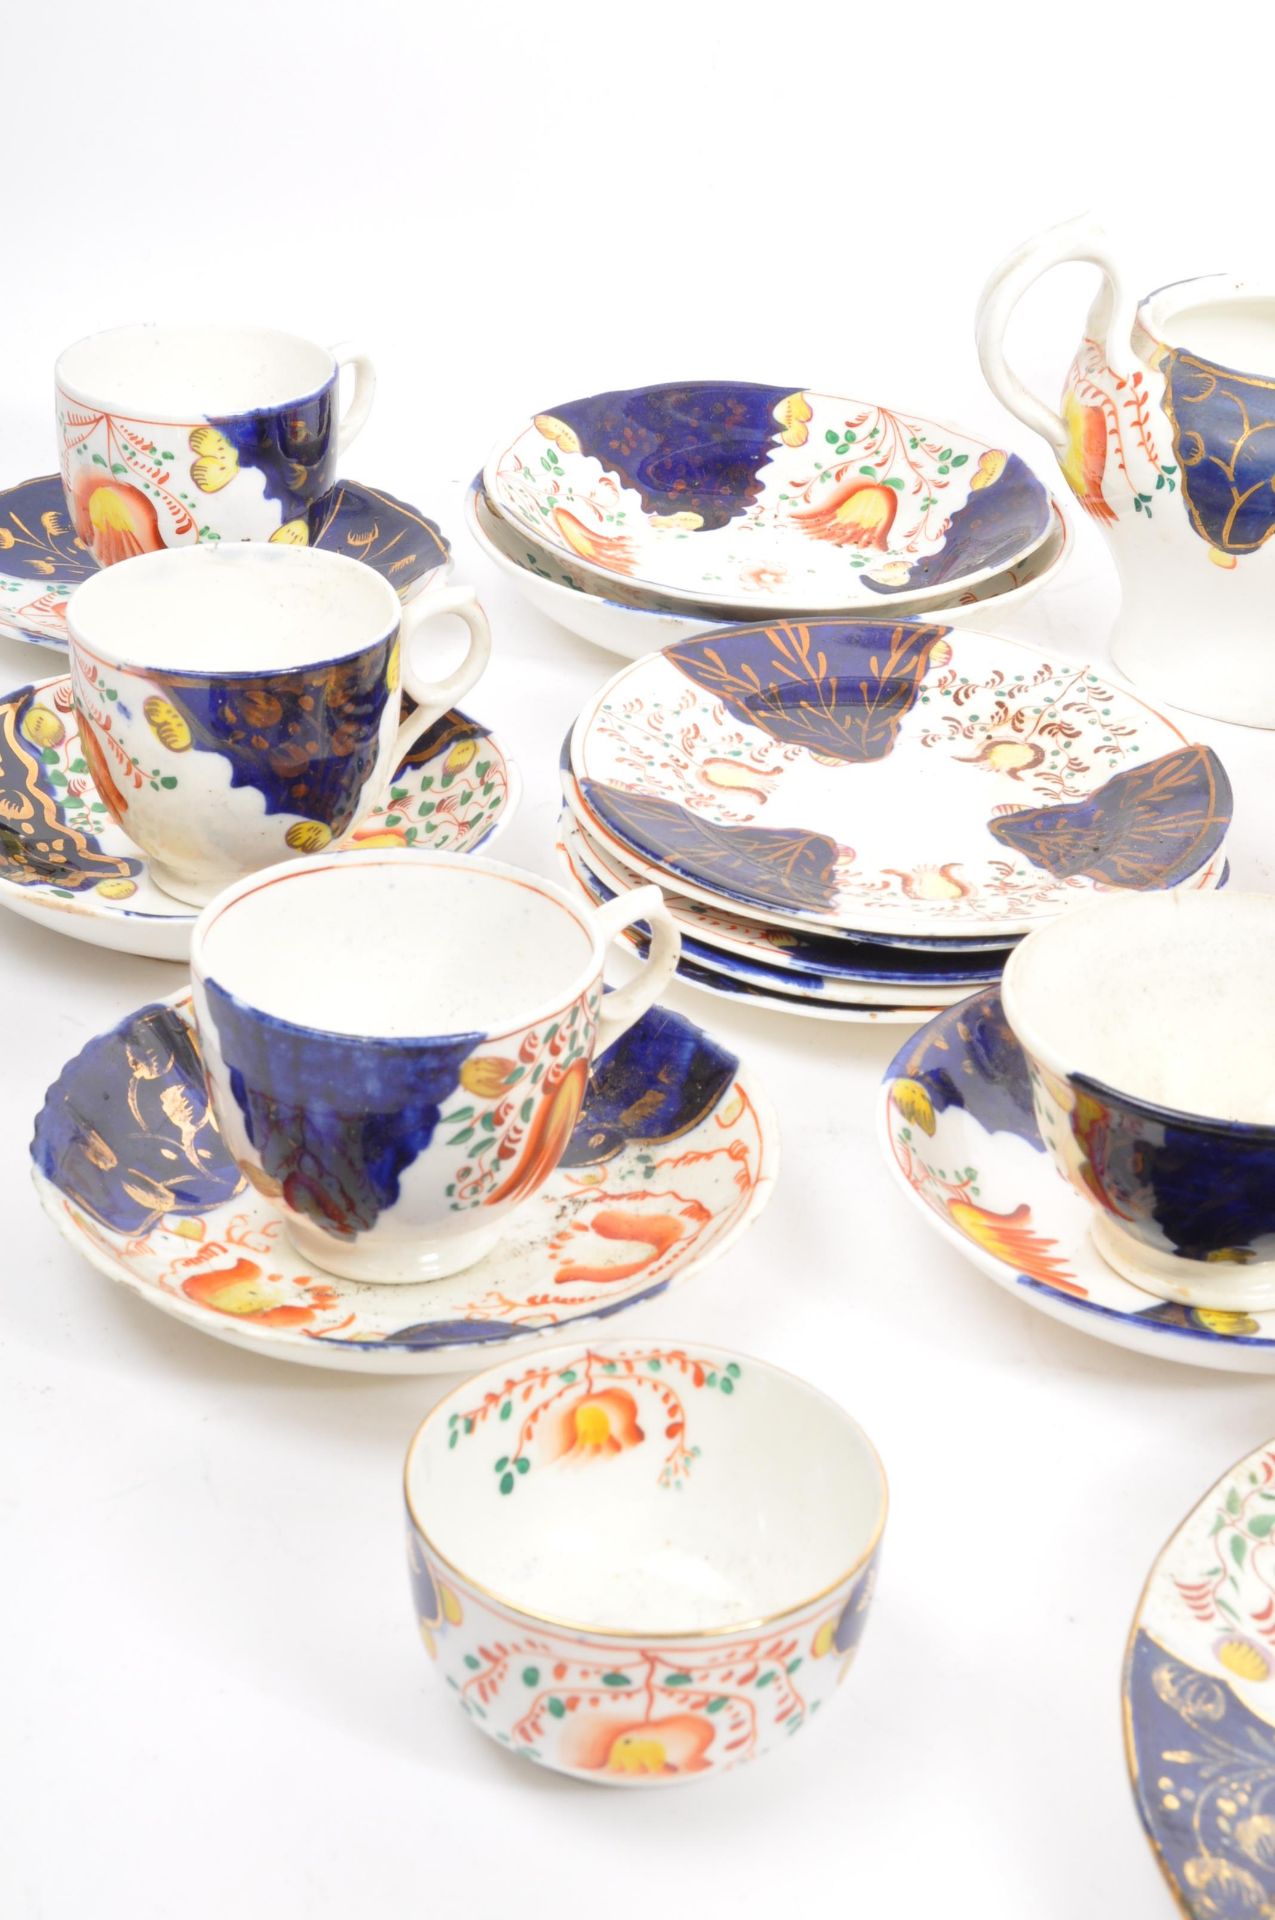 LATE VICTORIAN HAND PAINTED TEA SERVICE BY GAUDY WELSH - Image 5 of 7